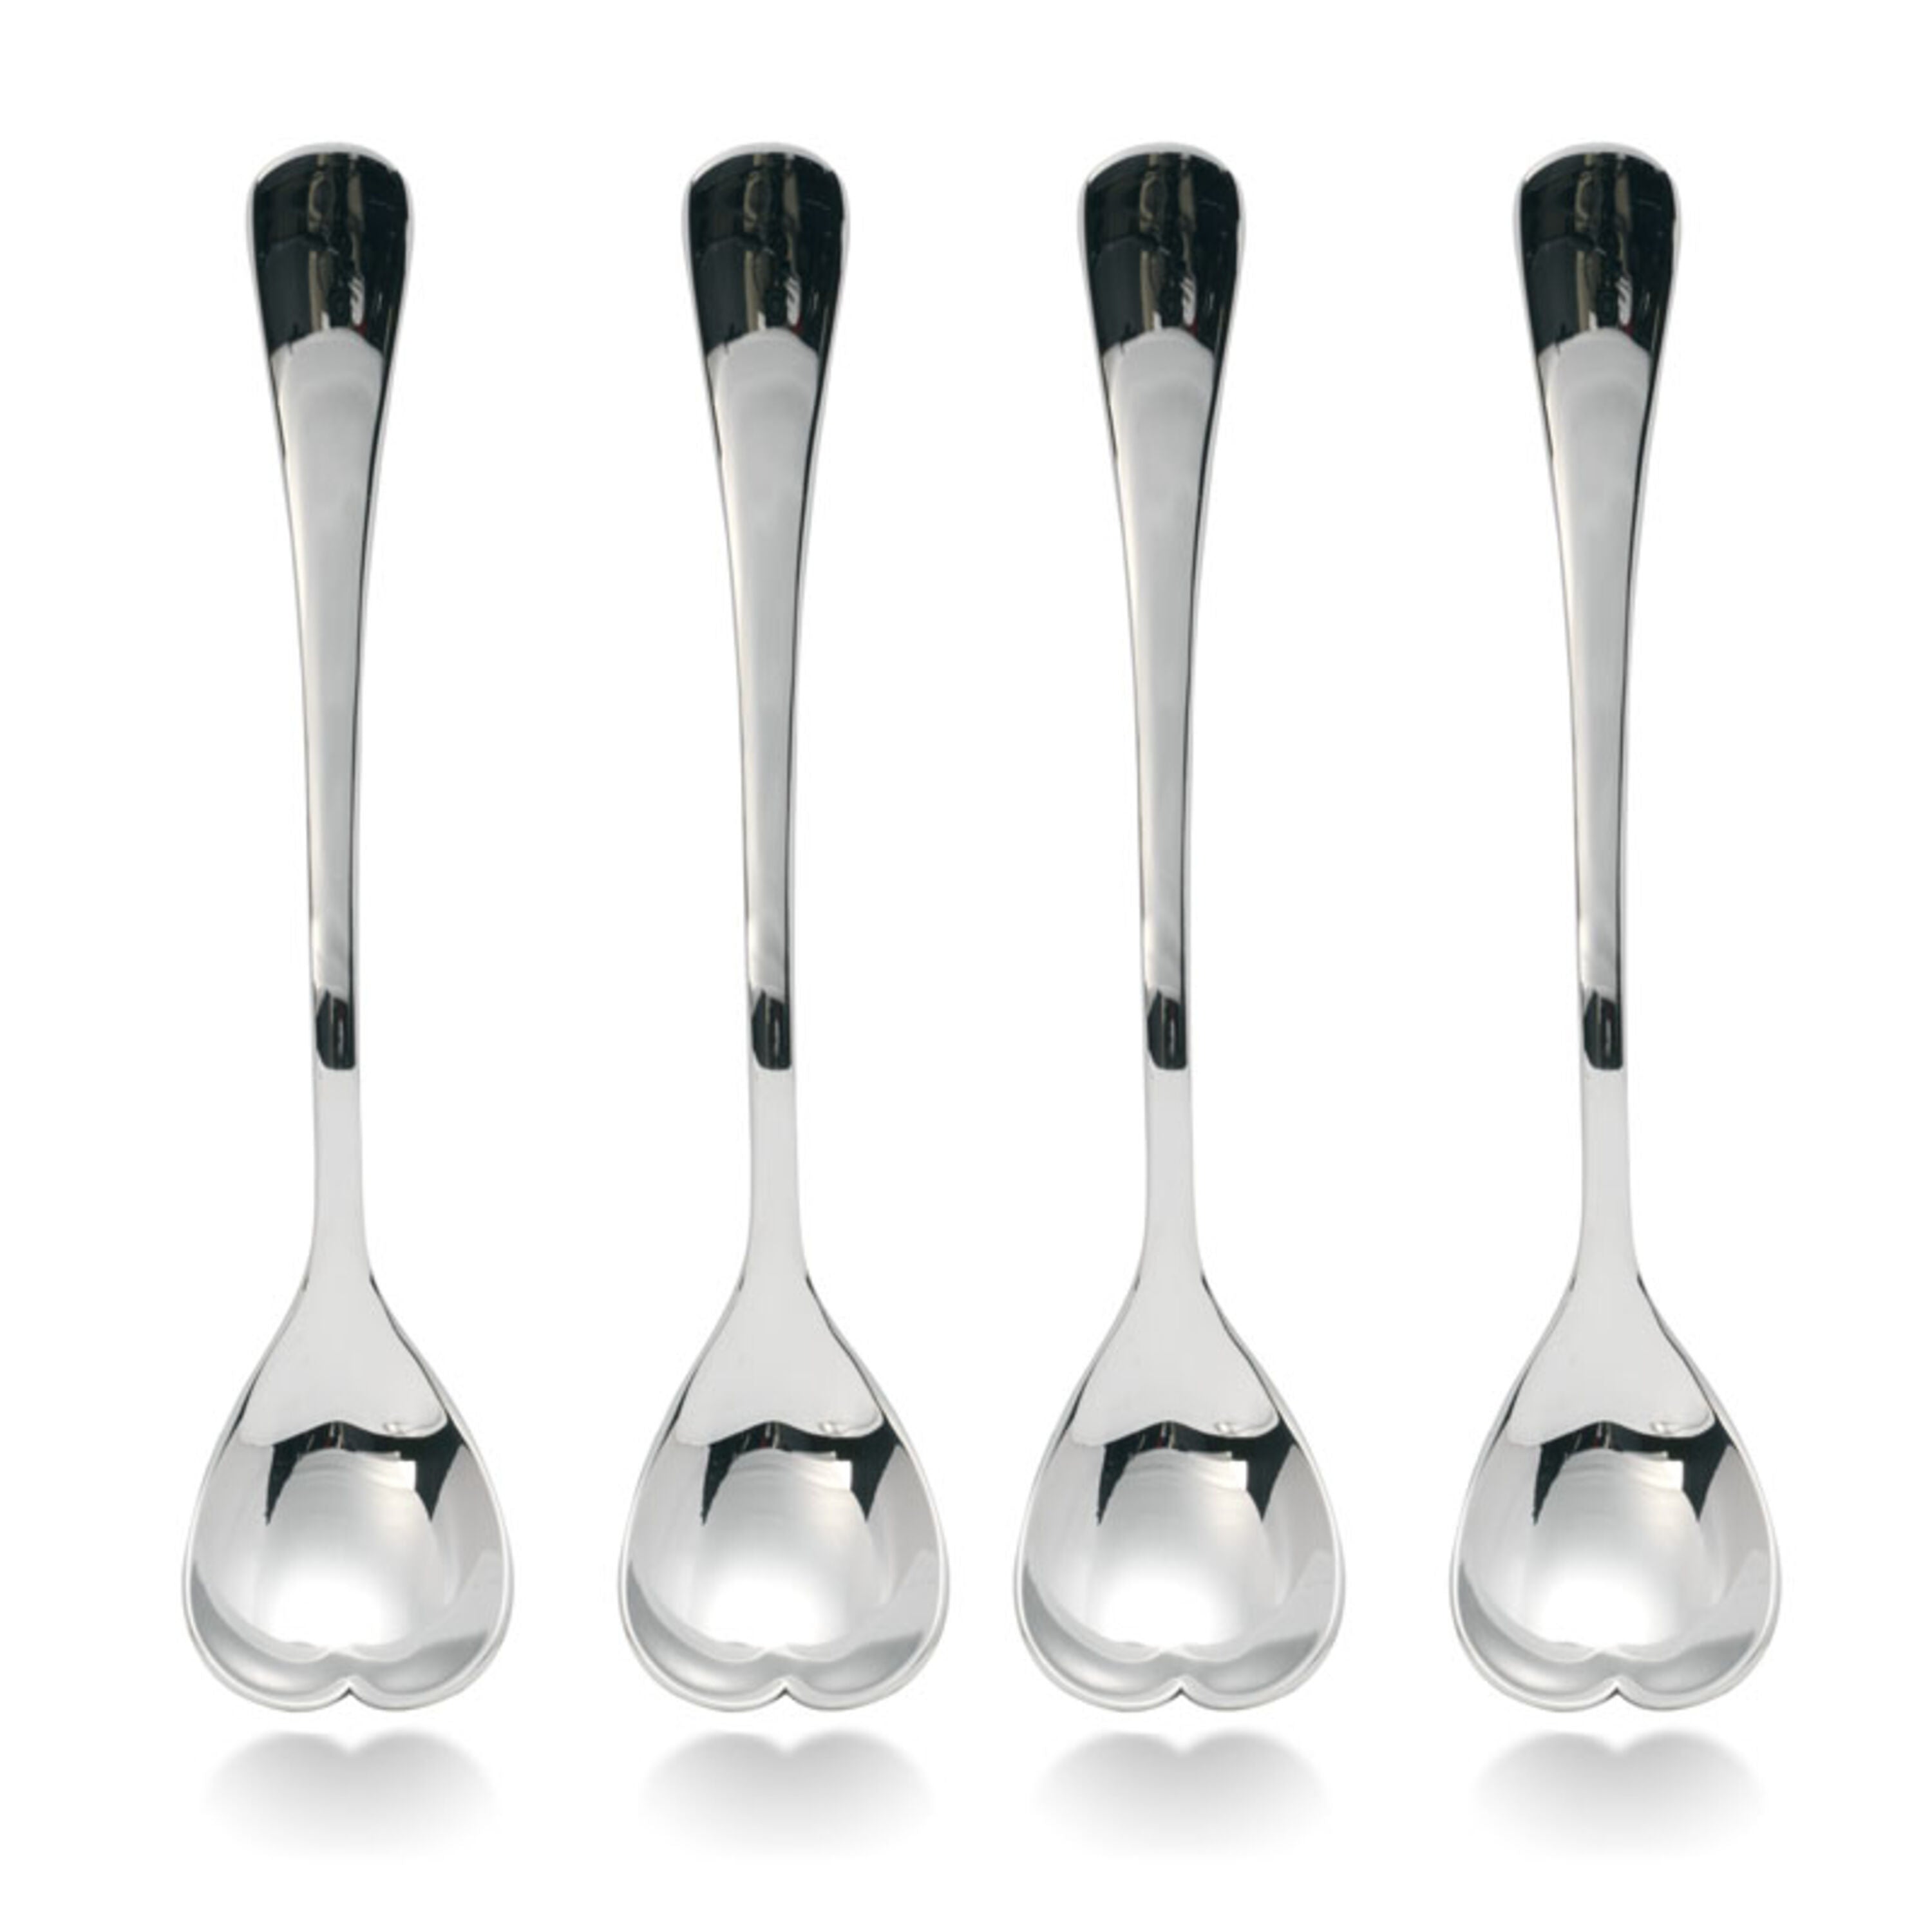 Towle T5271443 Irresistible 18.0 Stainless Steel Irresistible 4 Heart-Shaped Heads Coffee Spoons